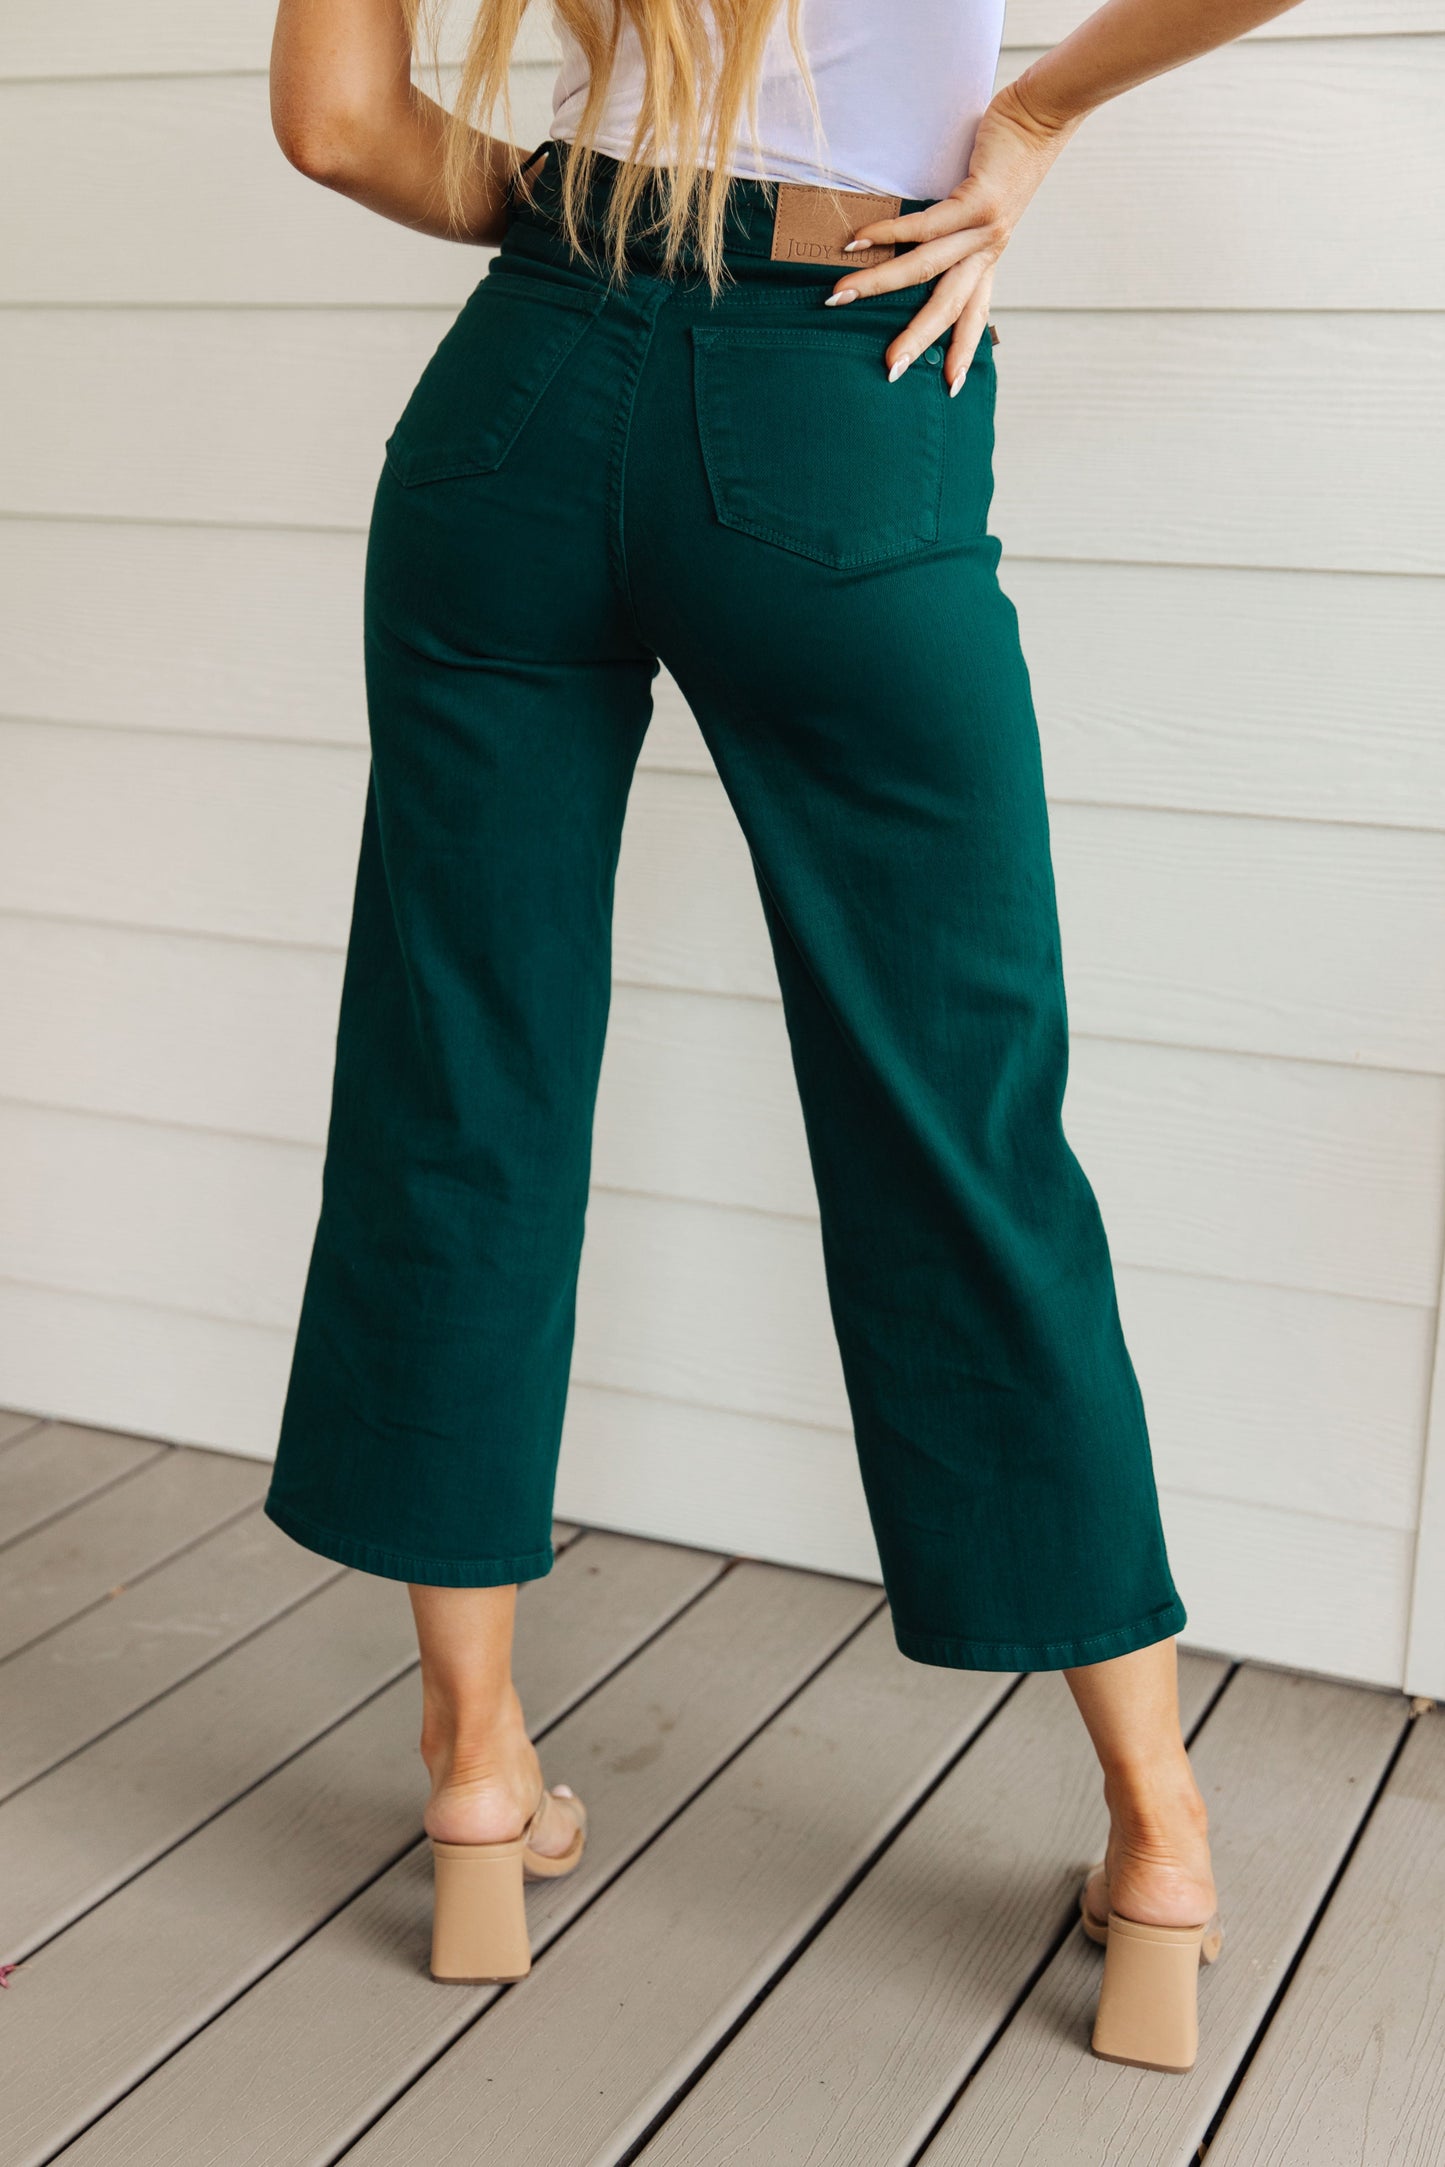 Briar Tummy Control Jeans in Teal